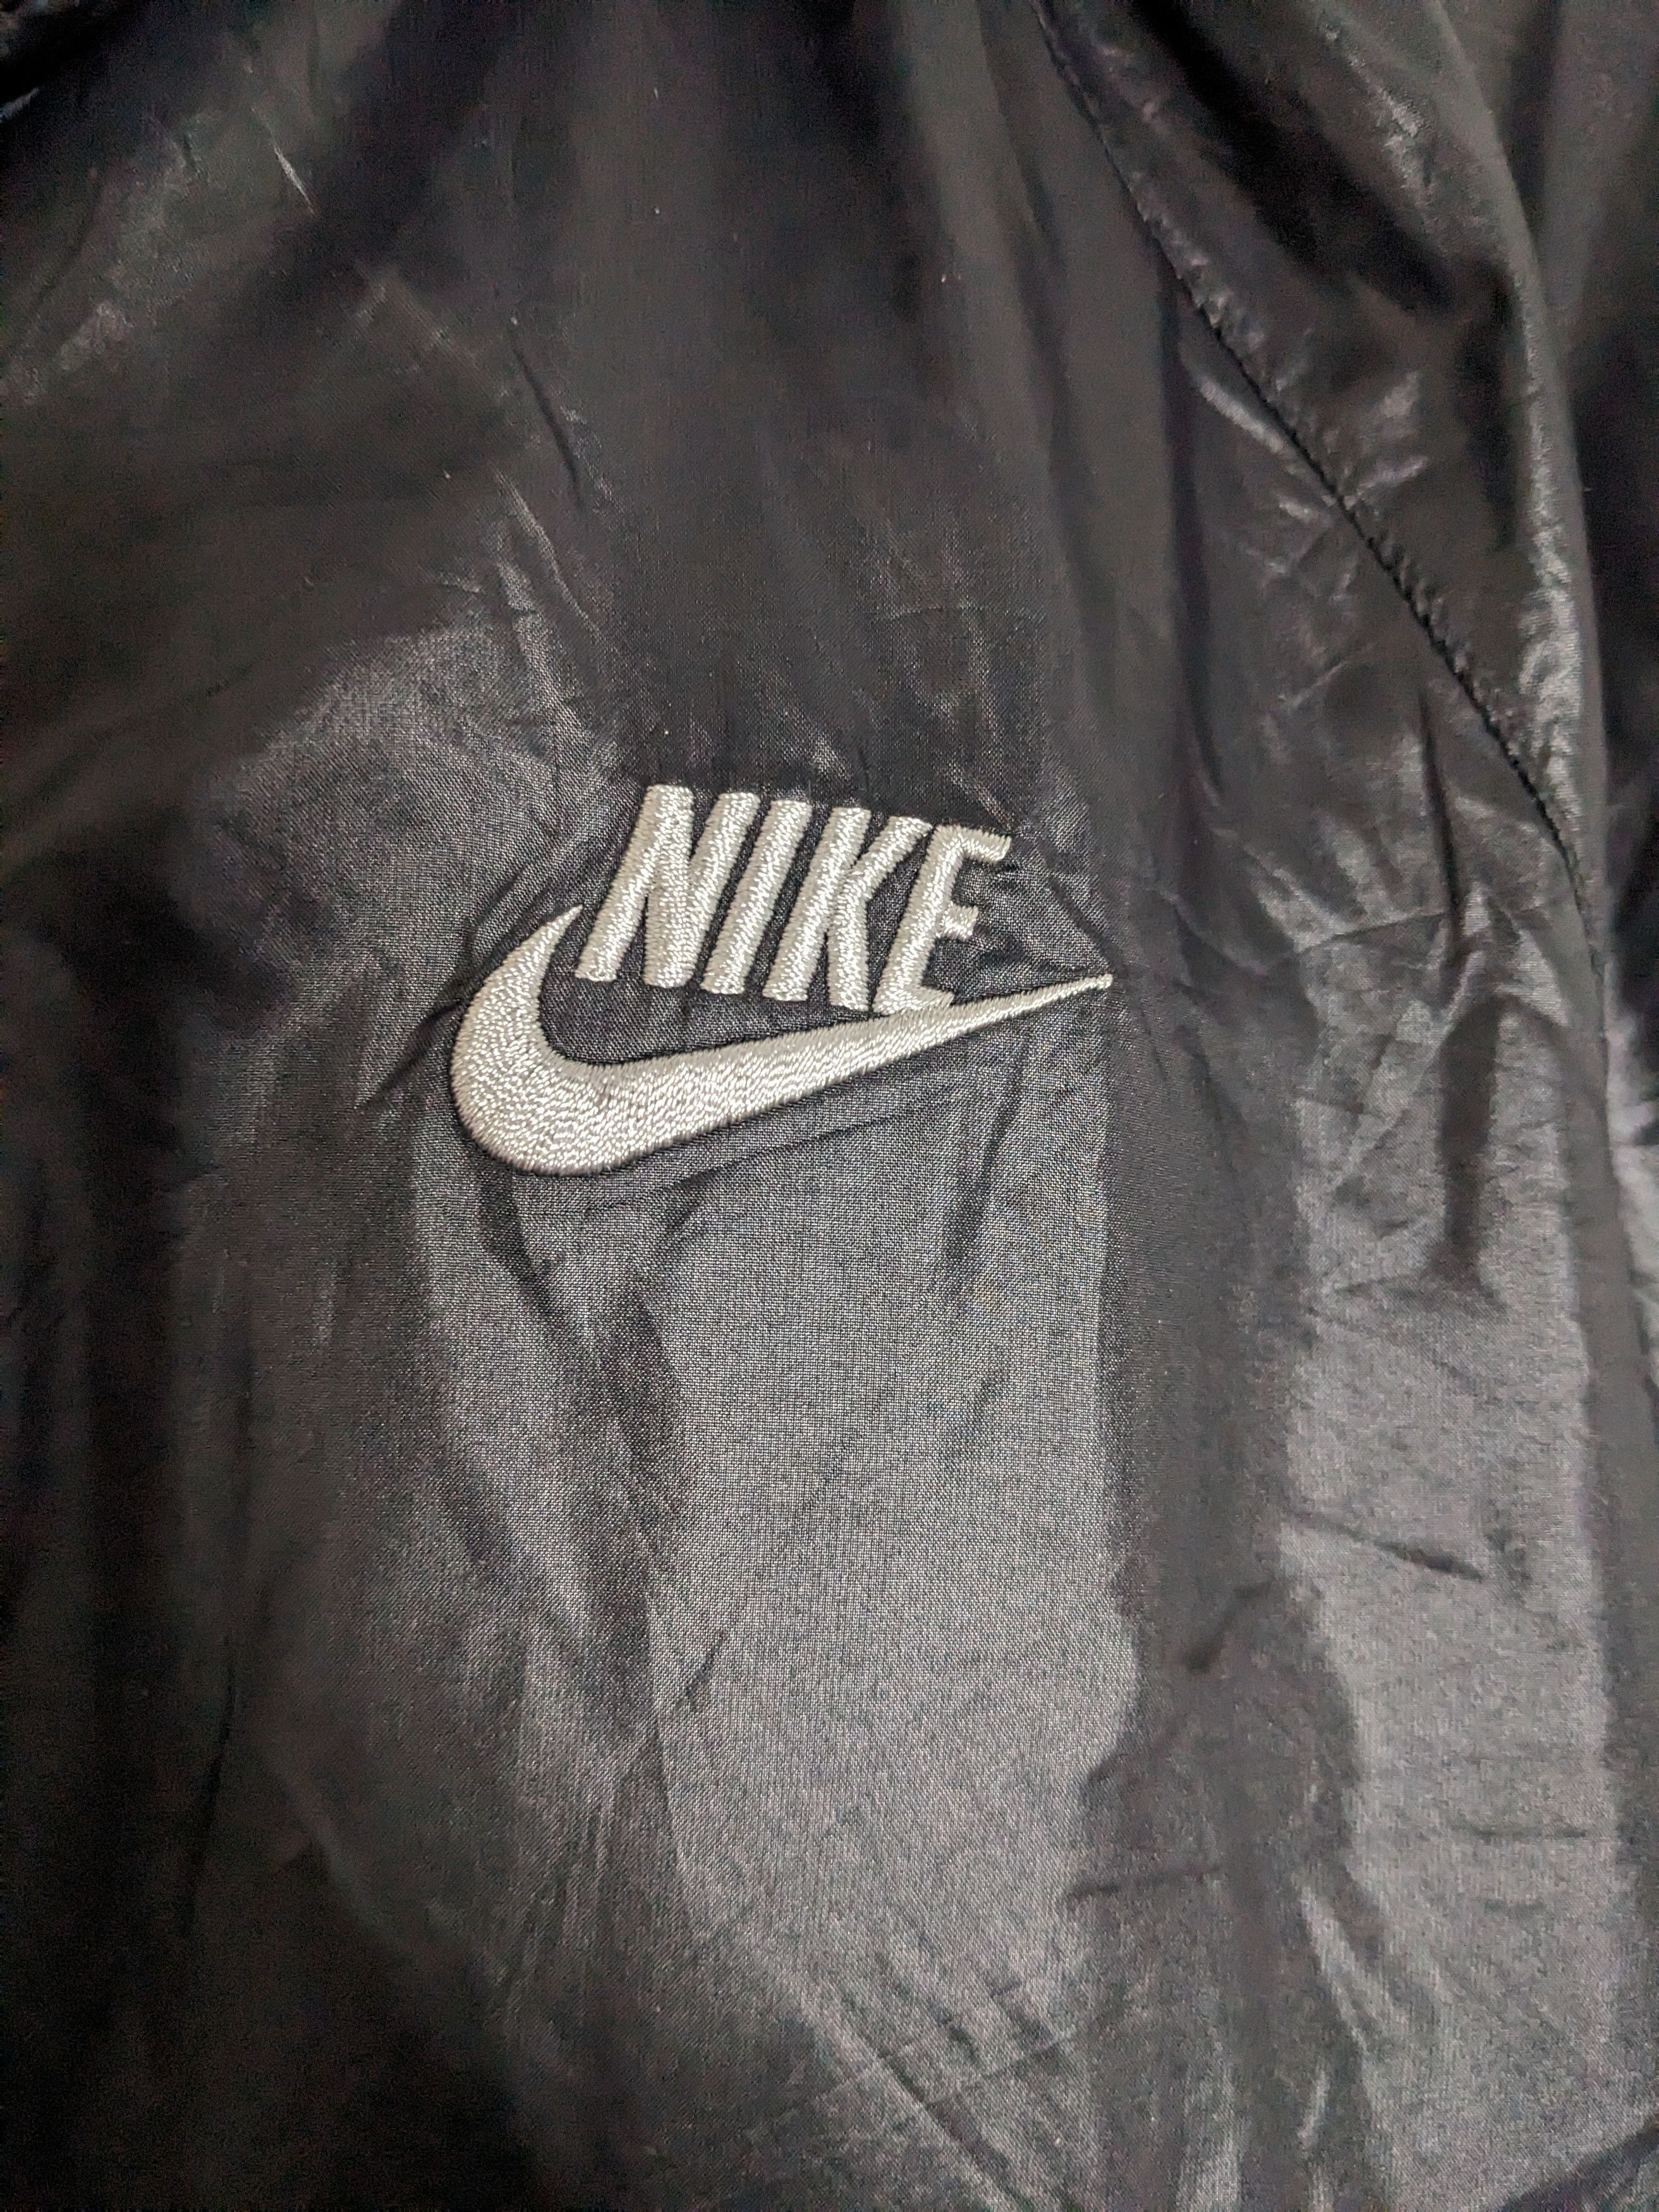 Nike Black Sherpa Lined Jacket Hooded Synthetic Fill Zip Up - 7